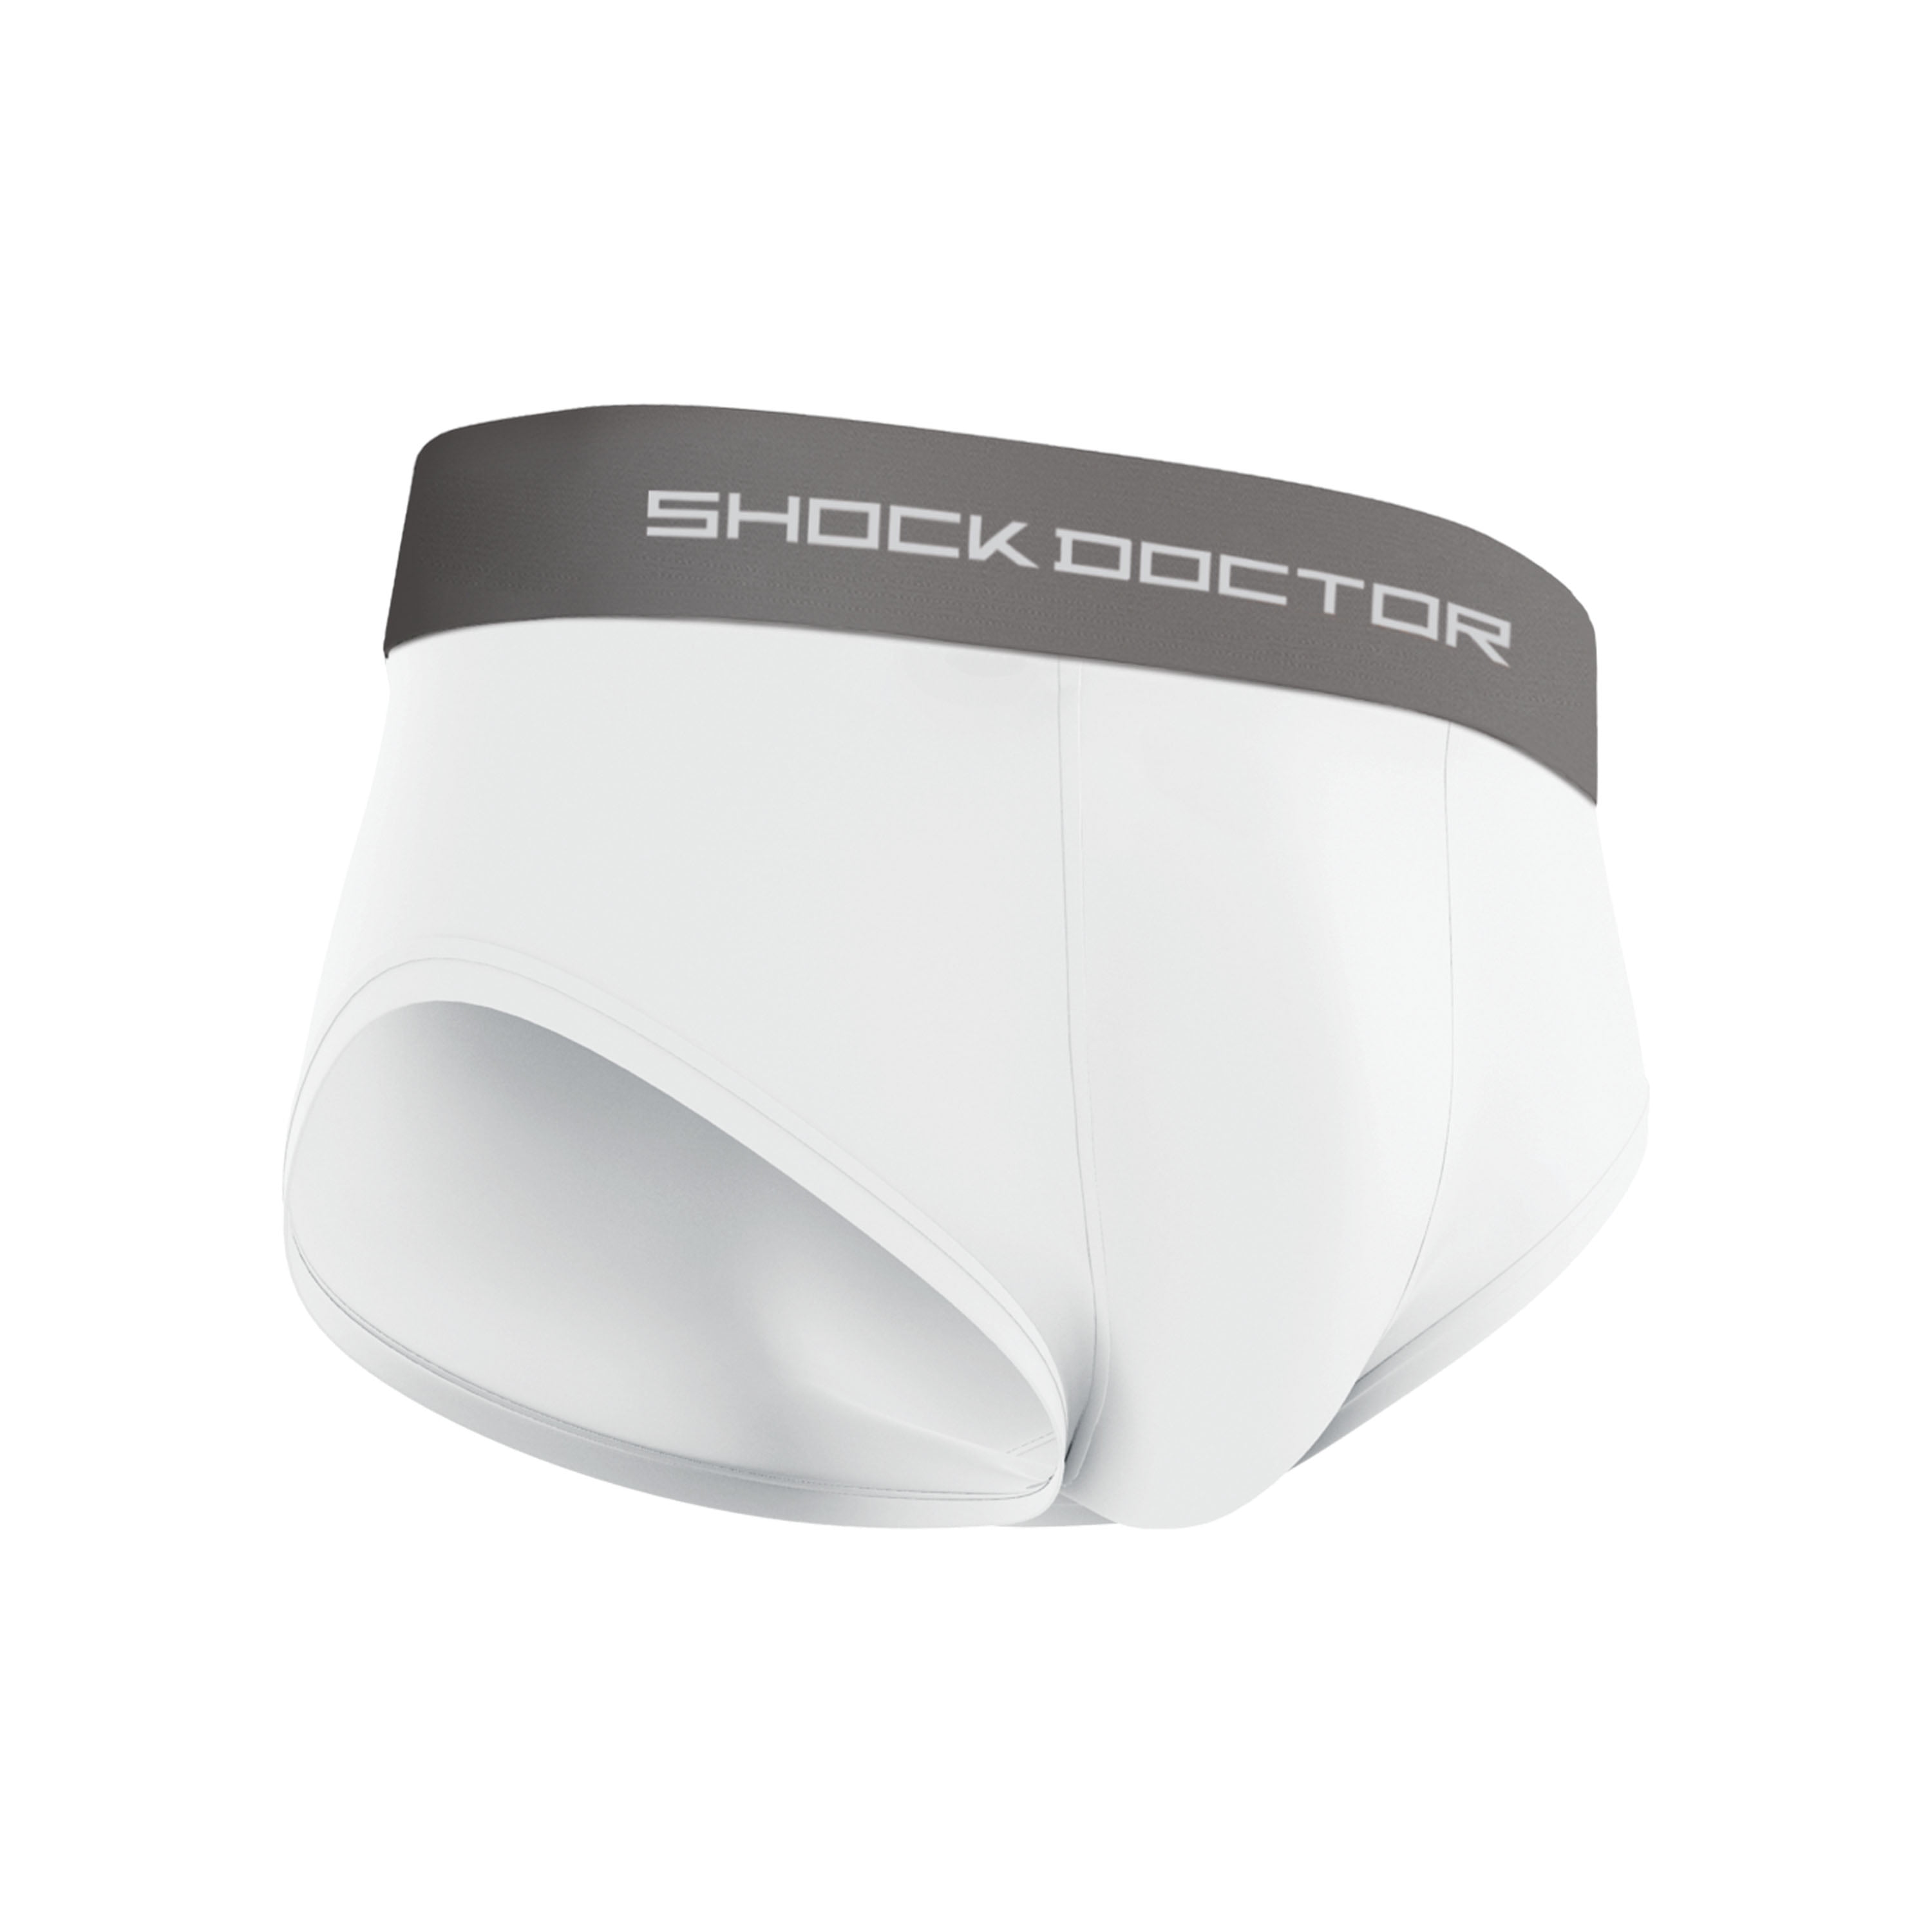 Details about   Shock Doctor Men's Jock Supporter with BioFlex Cup 